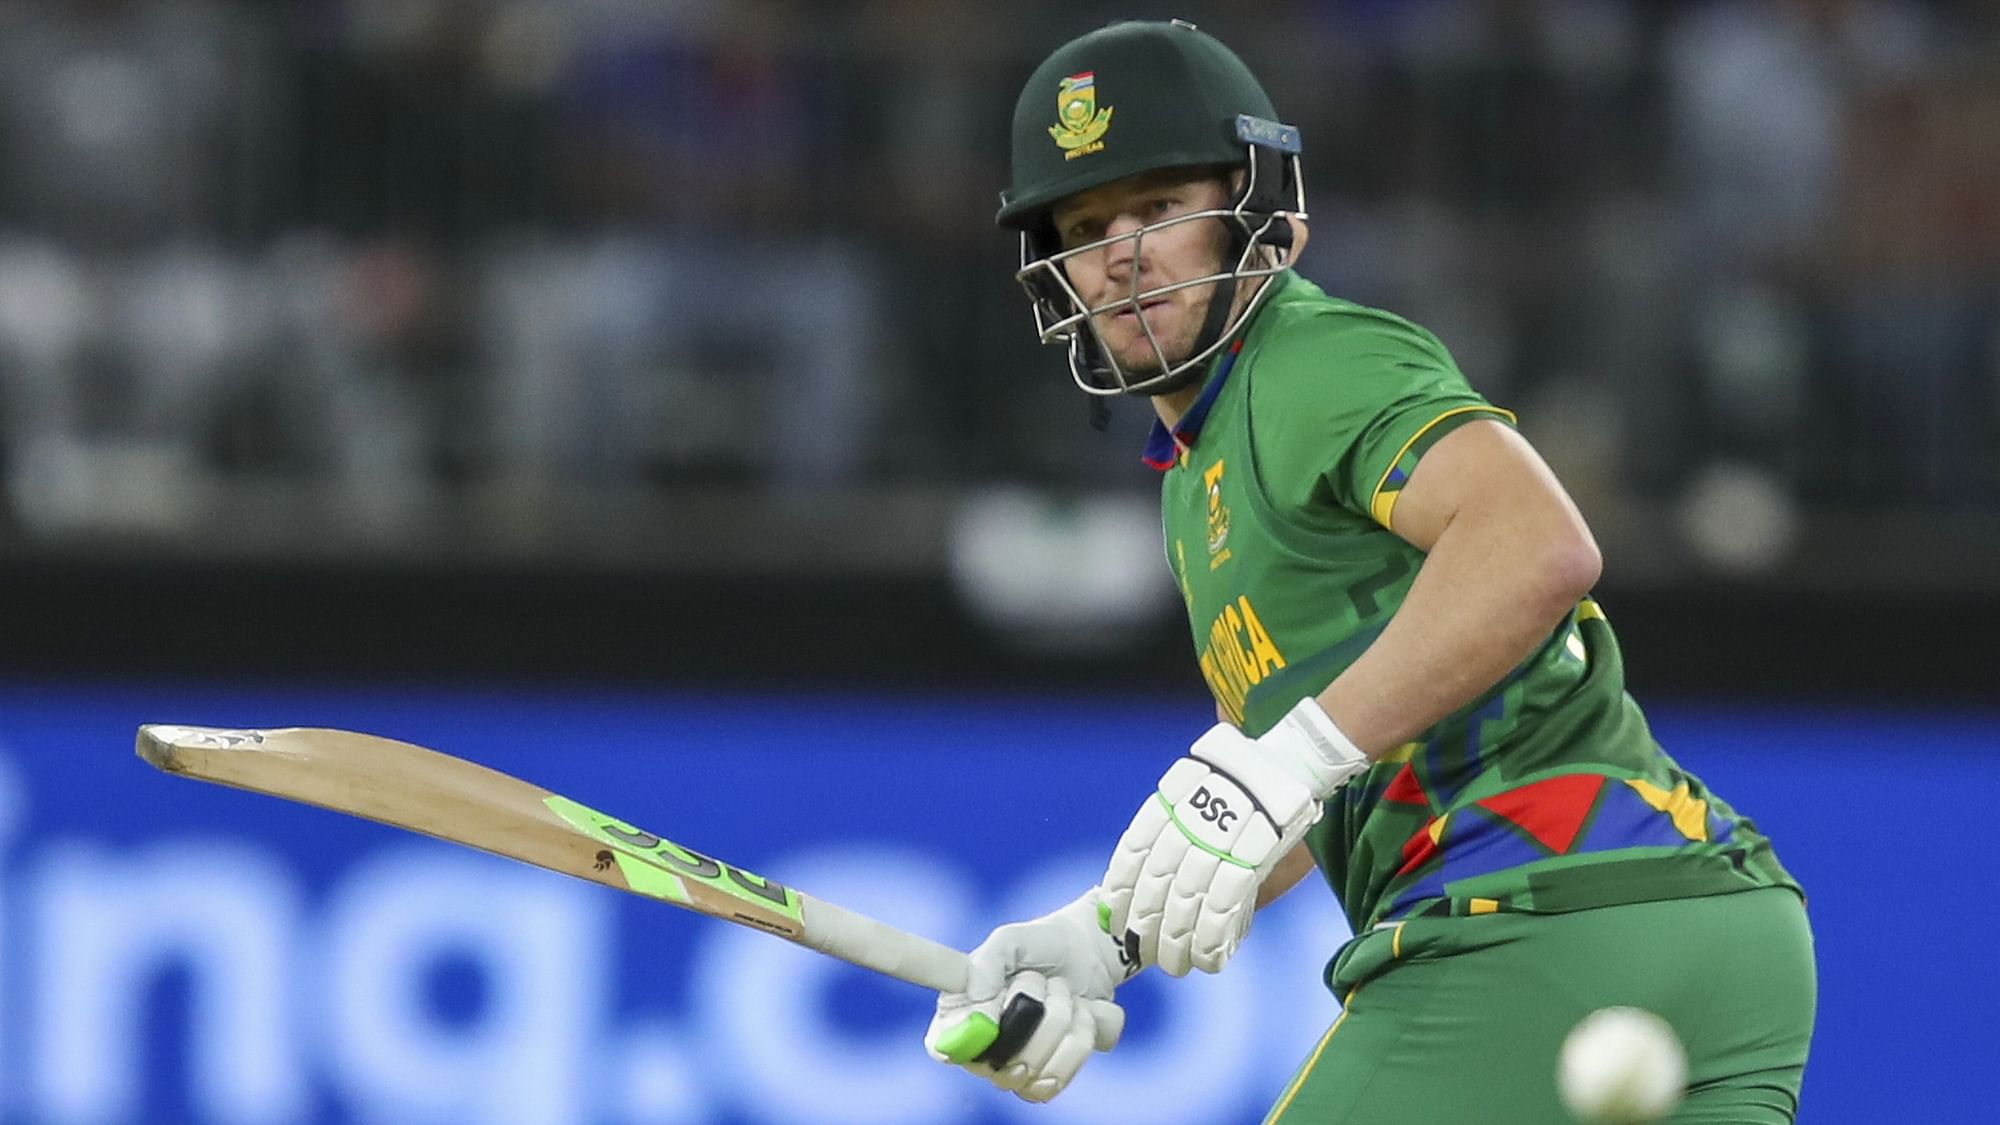 <div class="paragraphs"><p>South Africa's David Miller looks on after playing a shot against India in the Super 12 match of the men's T20 World Cup in Perth on Sunday.</p></div>